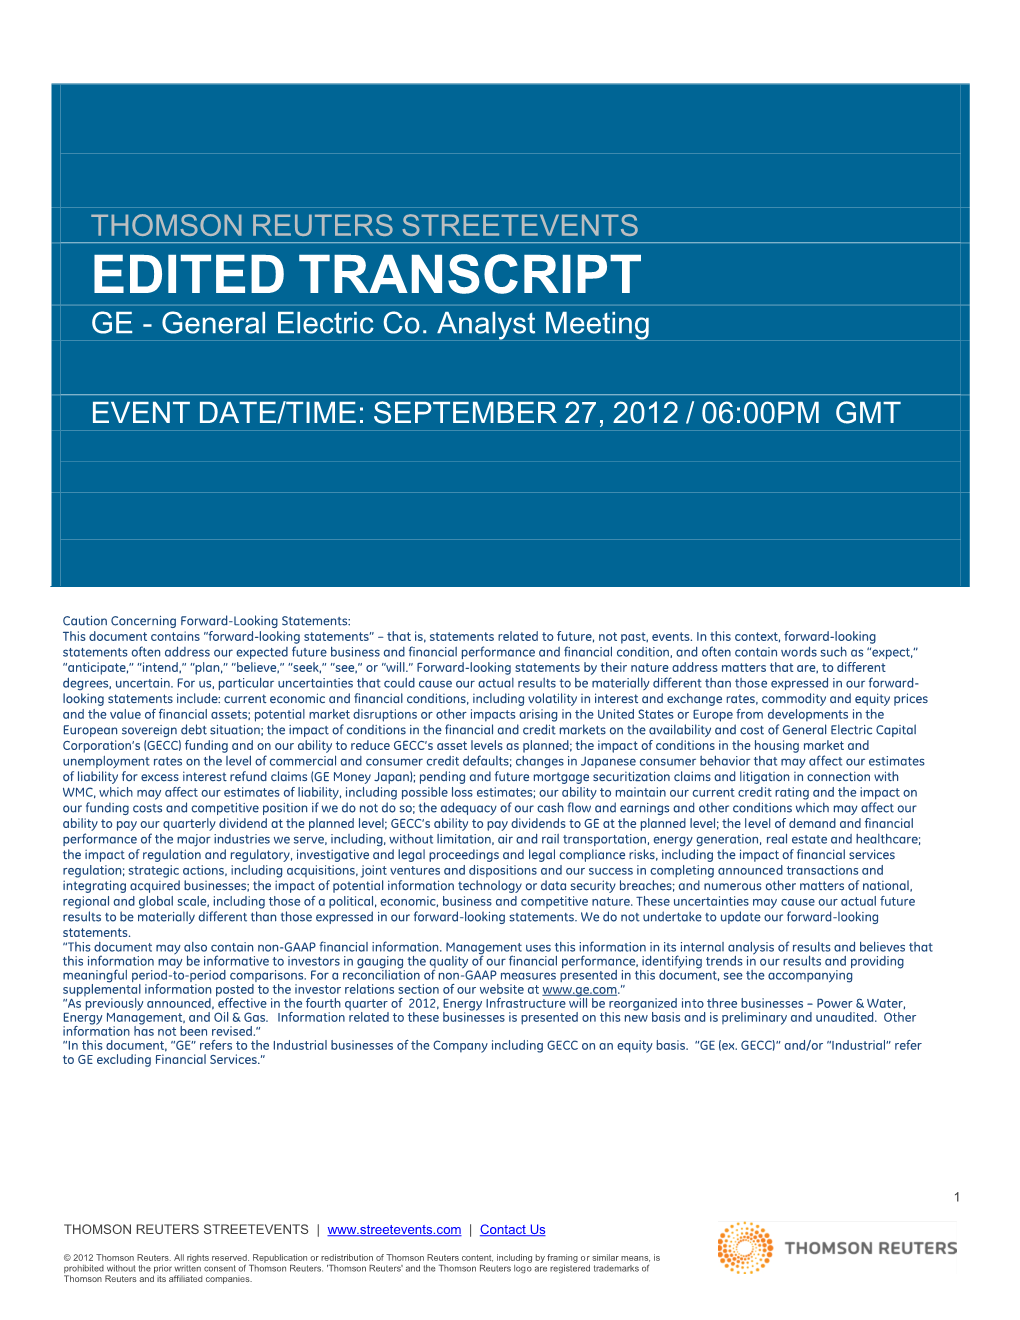 Event Transcripts Are Based, Companies May Make Projections Or Other Forward-Looking Statements Regarding a Variety of Items